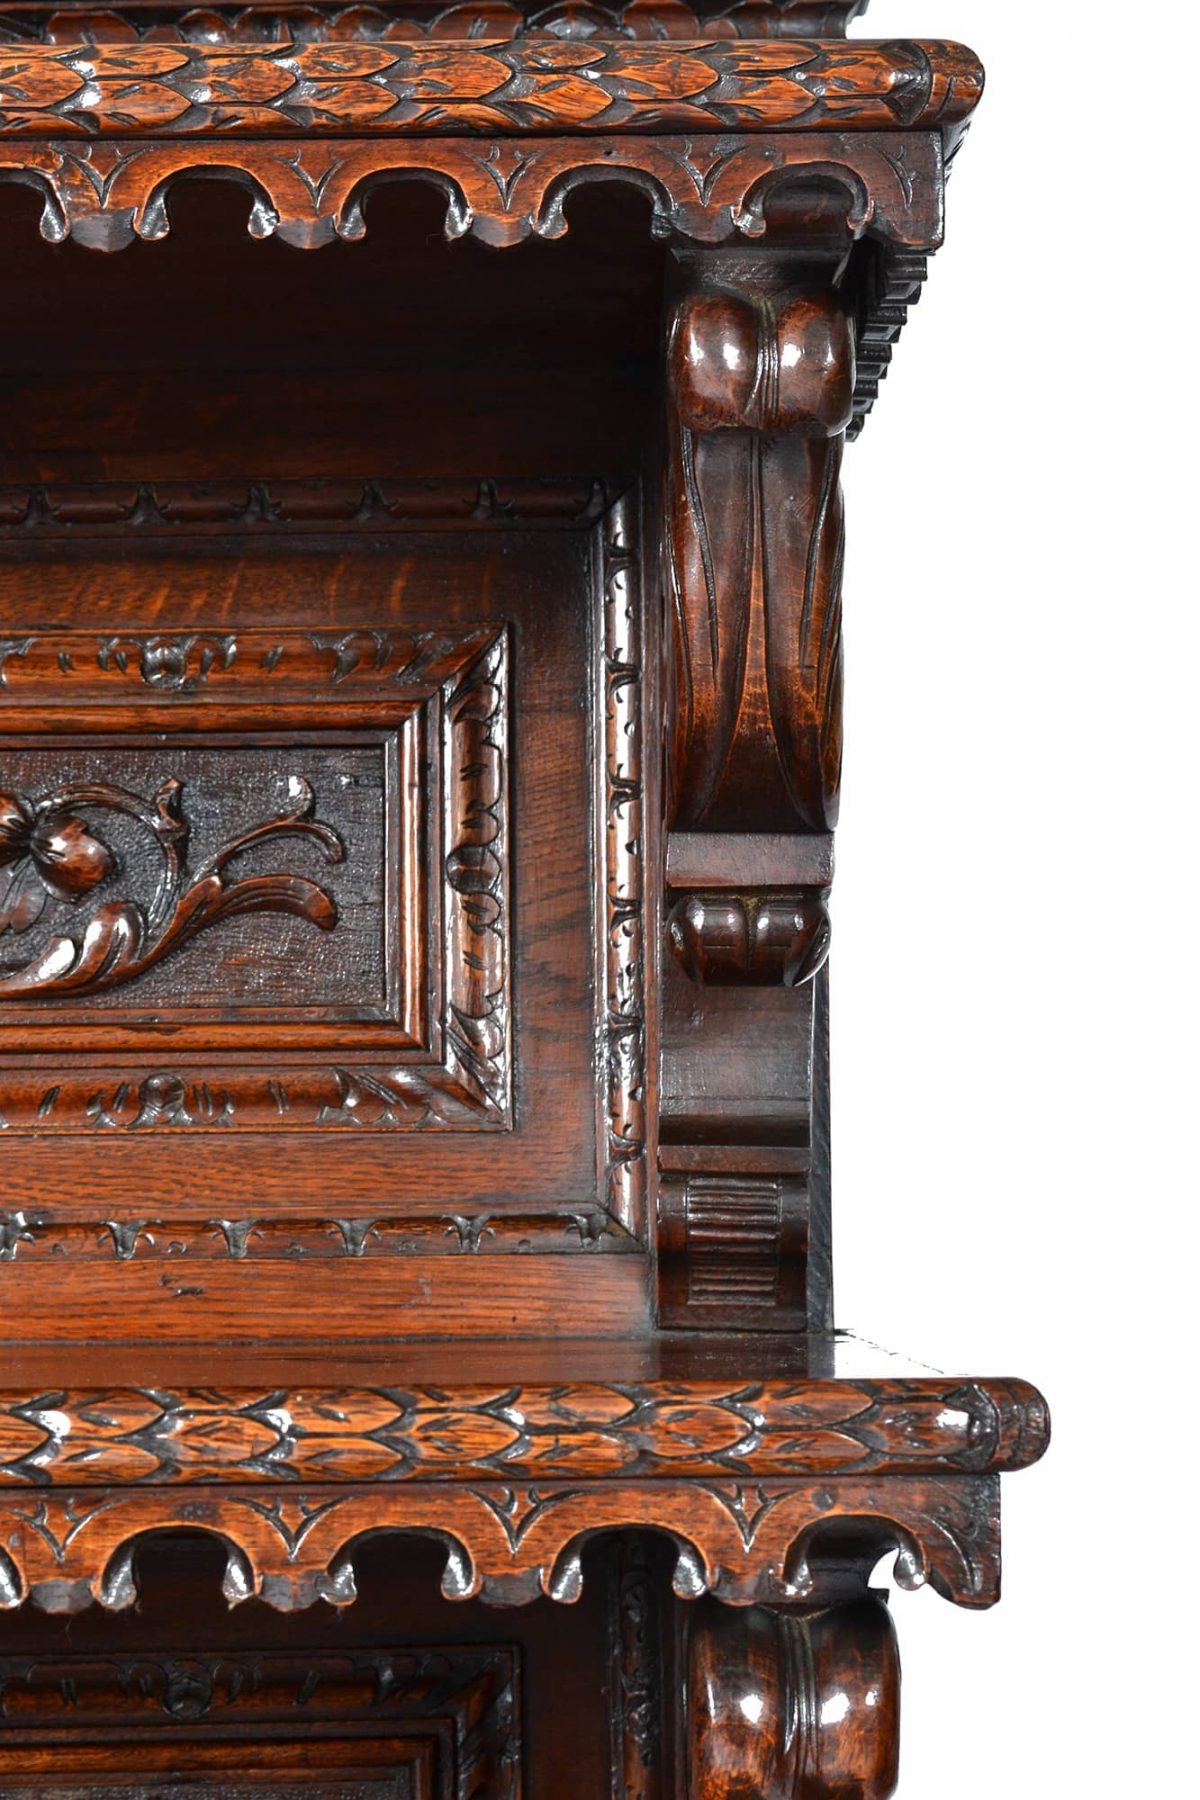 Antique Buffet, Sideboard, Server, Chiffonier, Renaissance - Henry II Style, Black Forest France 19th Century